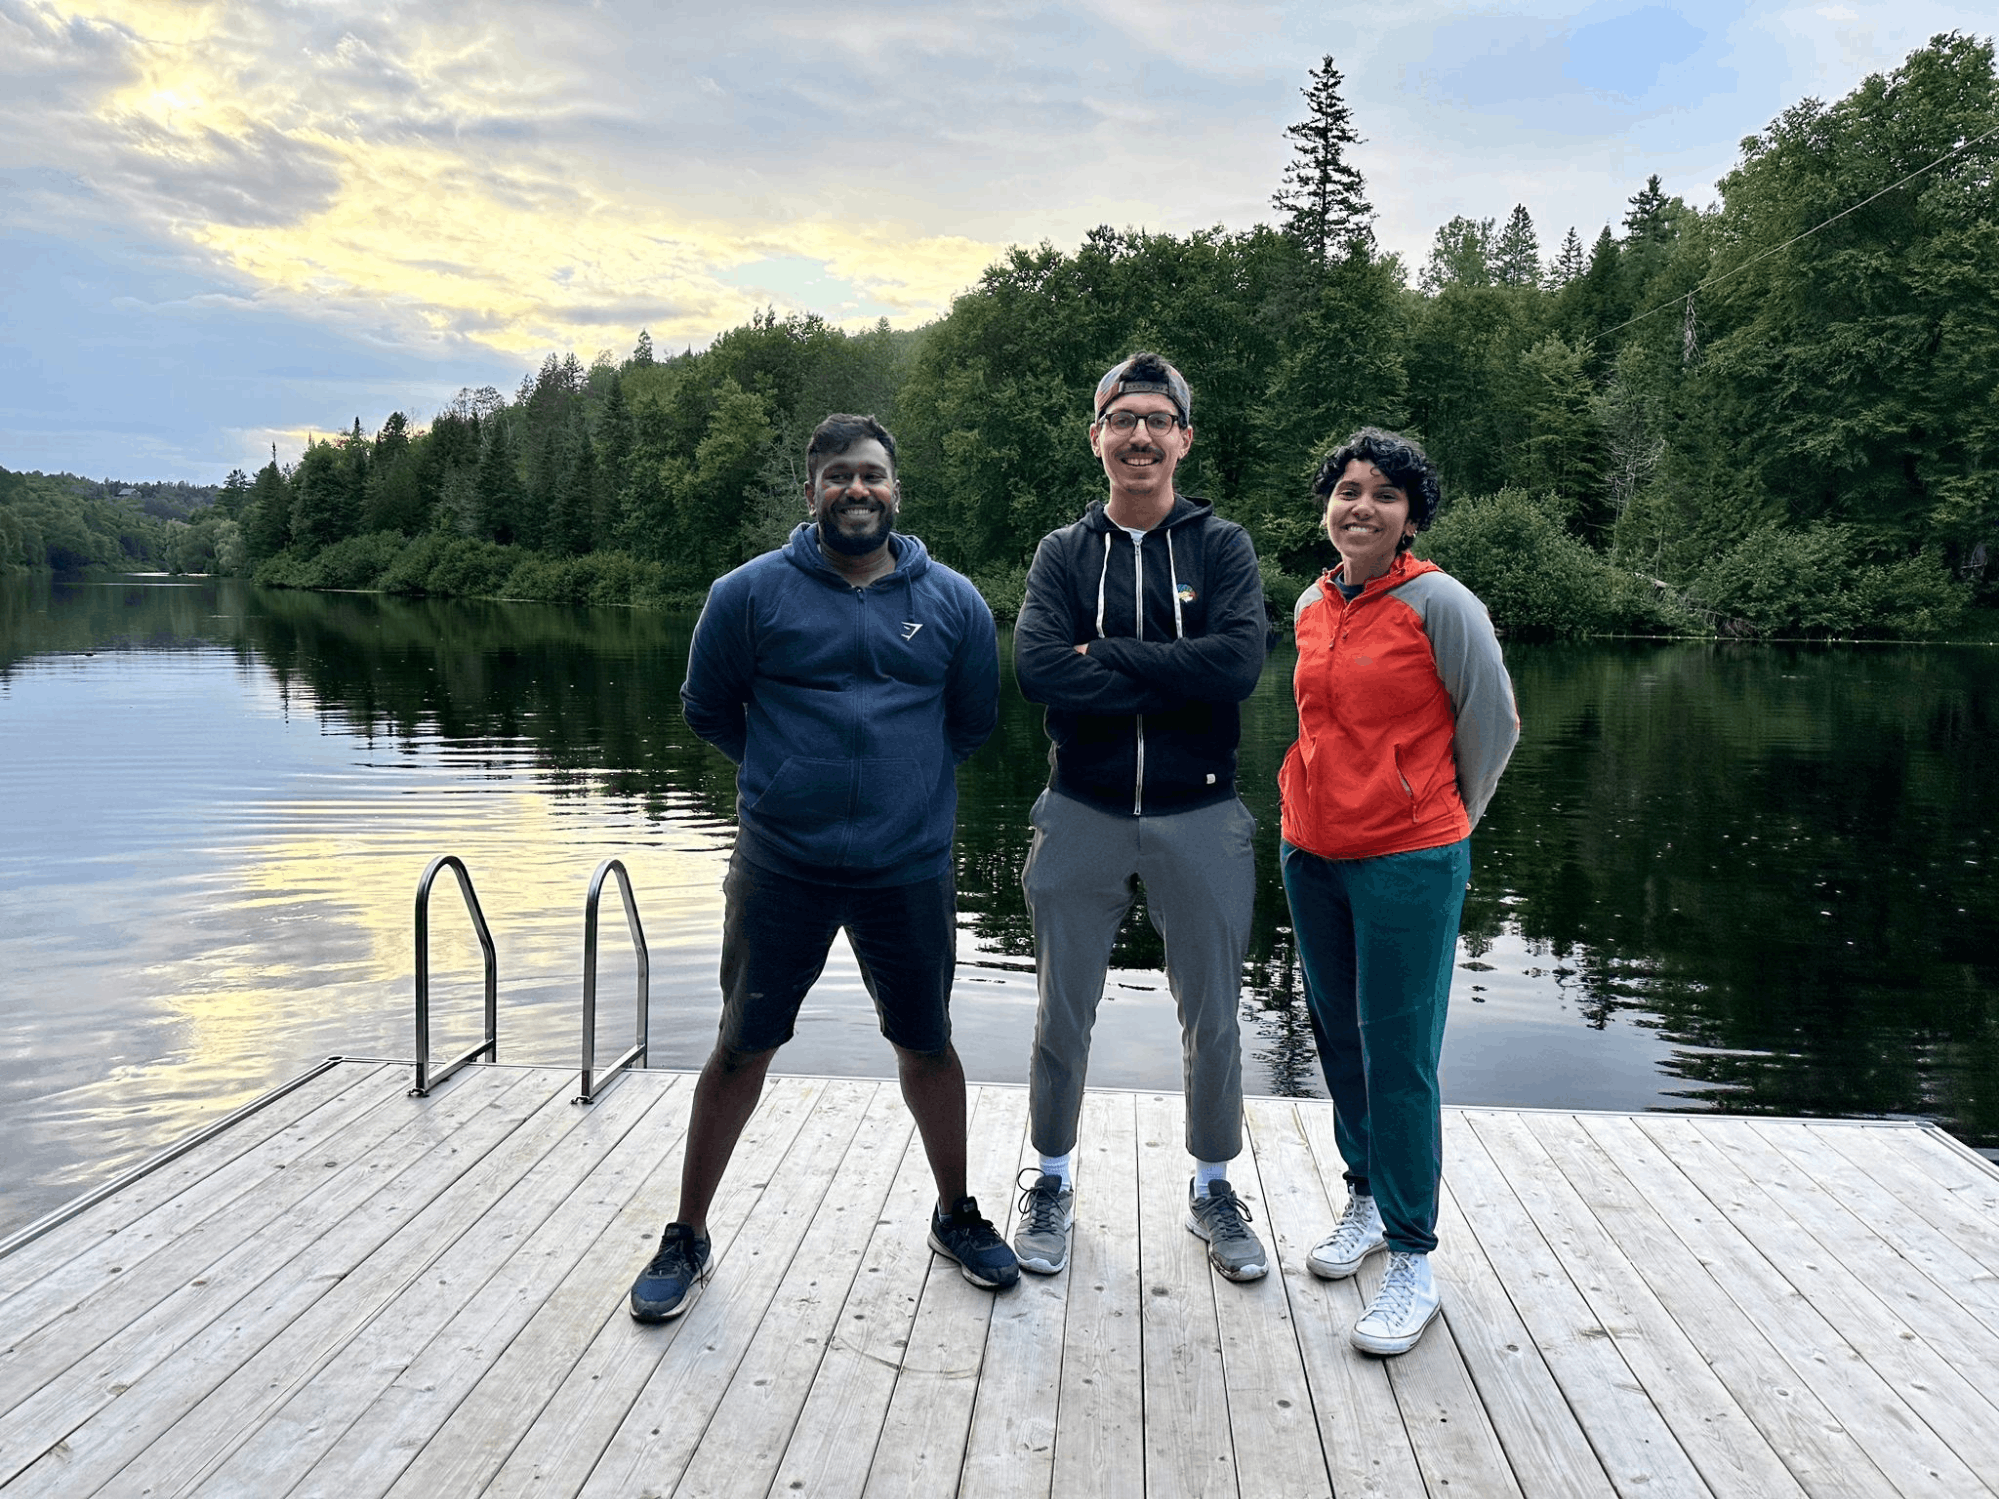 An image of Malik, Seby, and Sudnya on a dock. There are trees, water, and the Canadian skyline behind them.